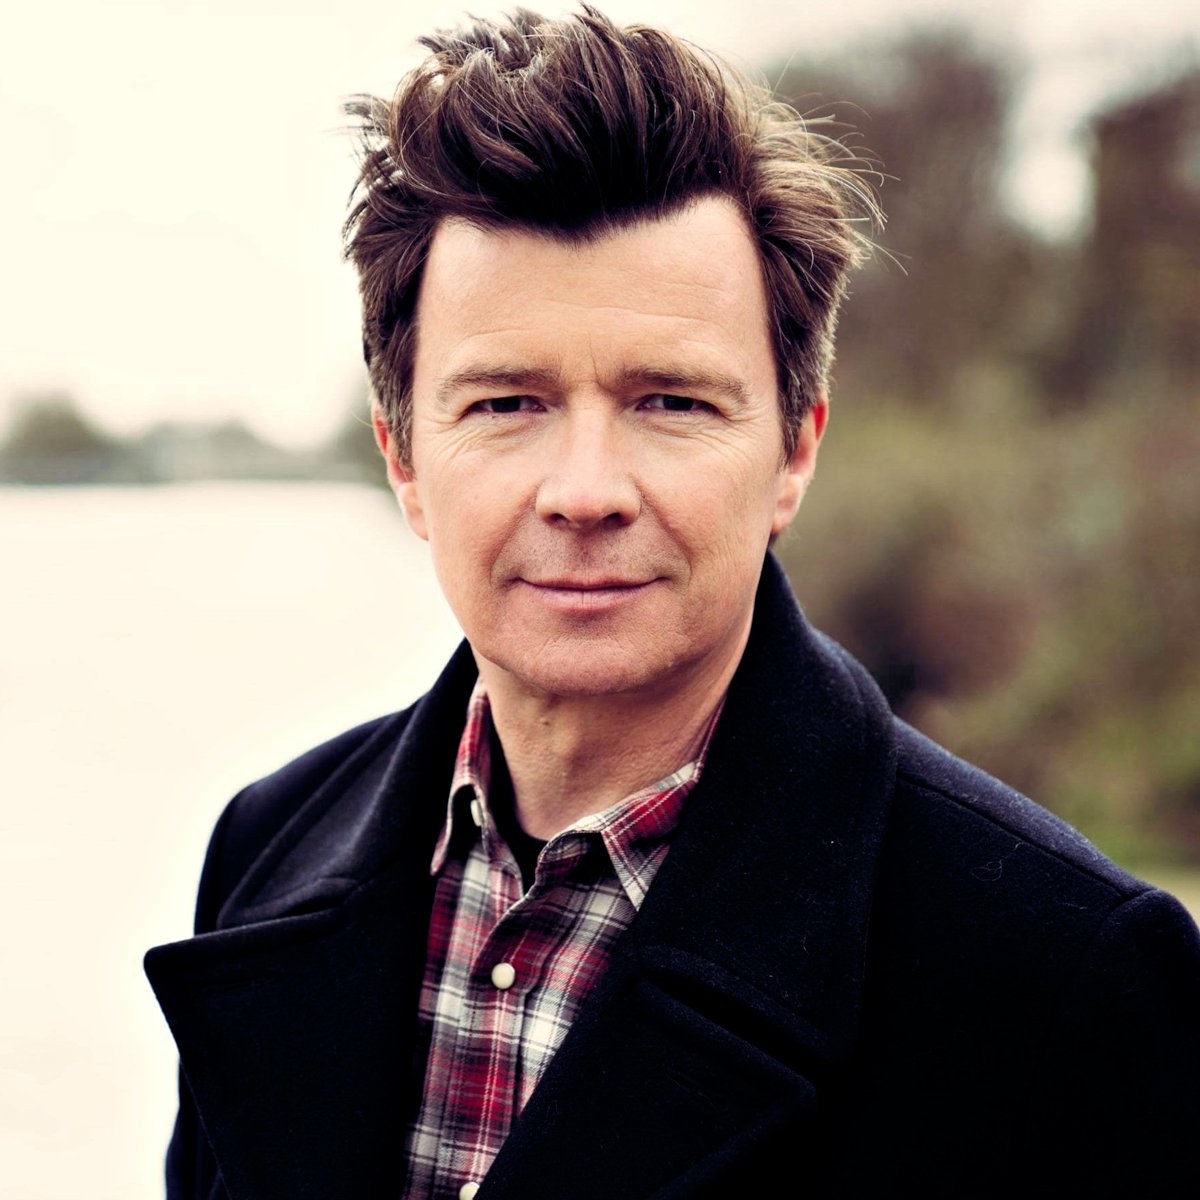 Rick Astley music, videos, stats, and photos Last.fm.